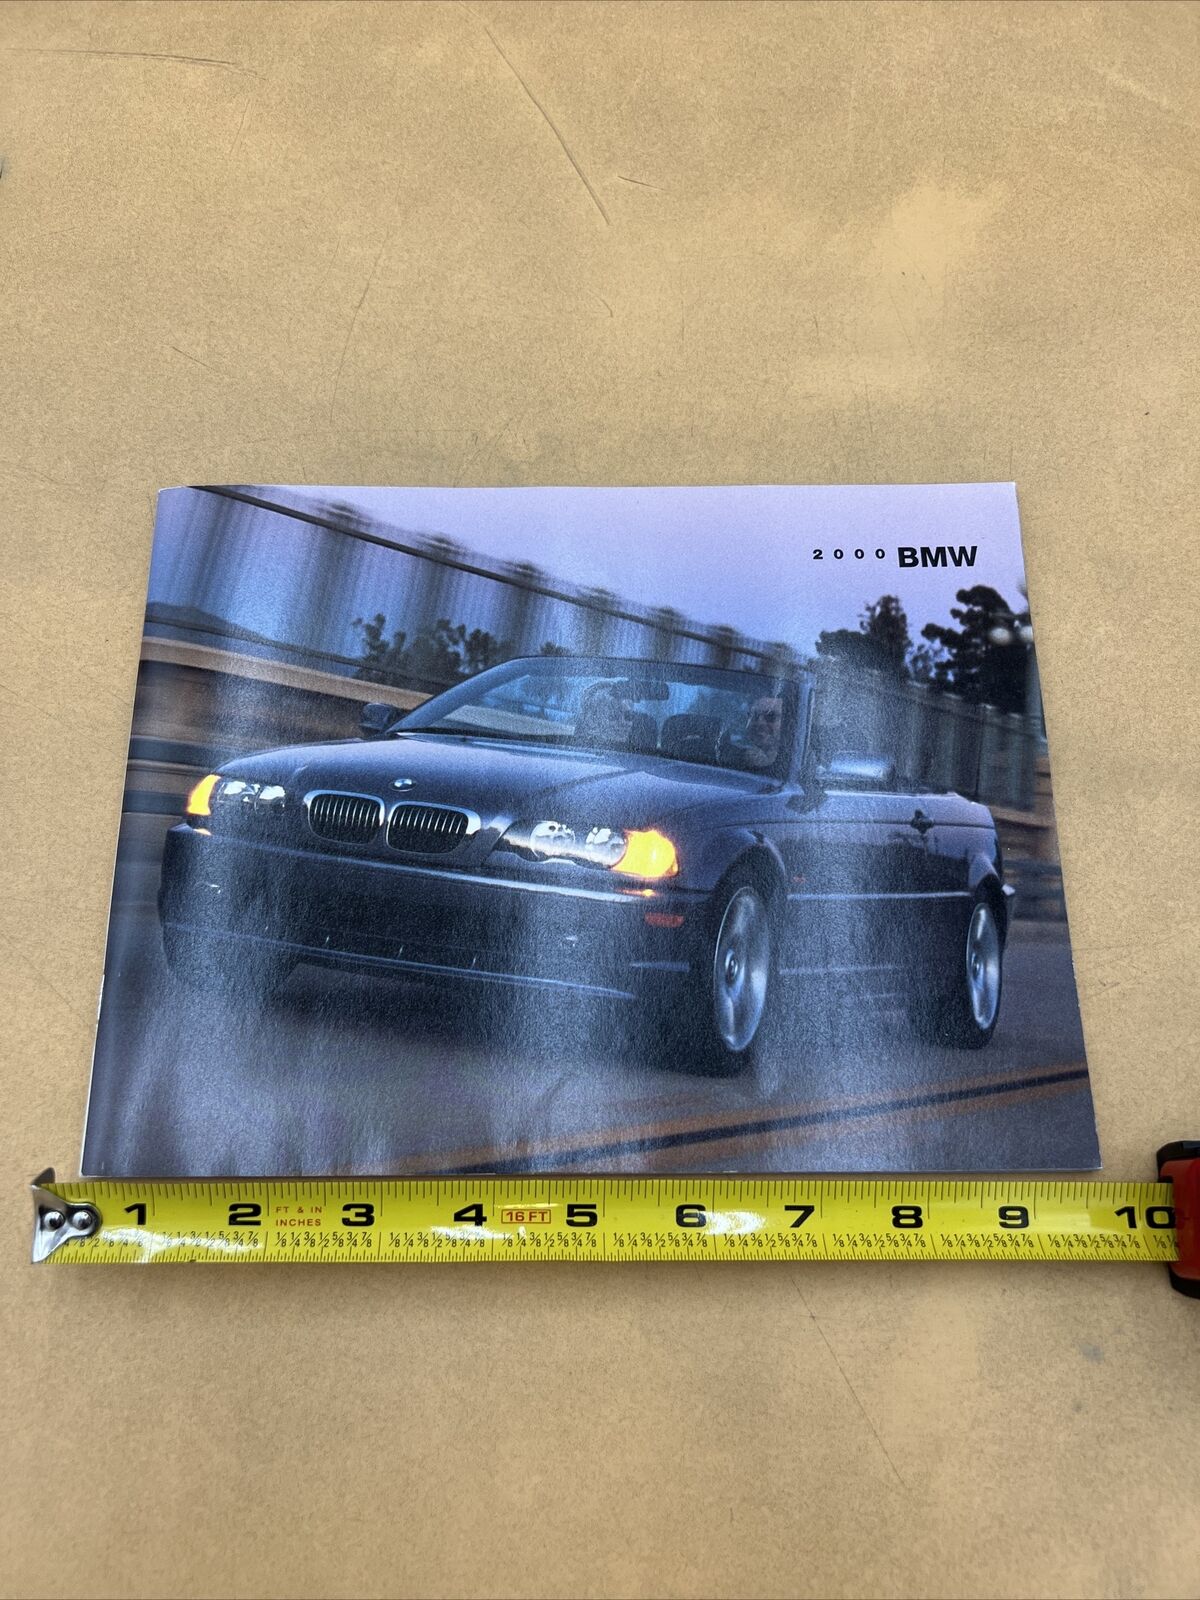 2000 Bmw M Roadster 3 Series Coupe And Sedan Sales Advertising Brochure Catalog